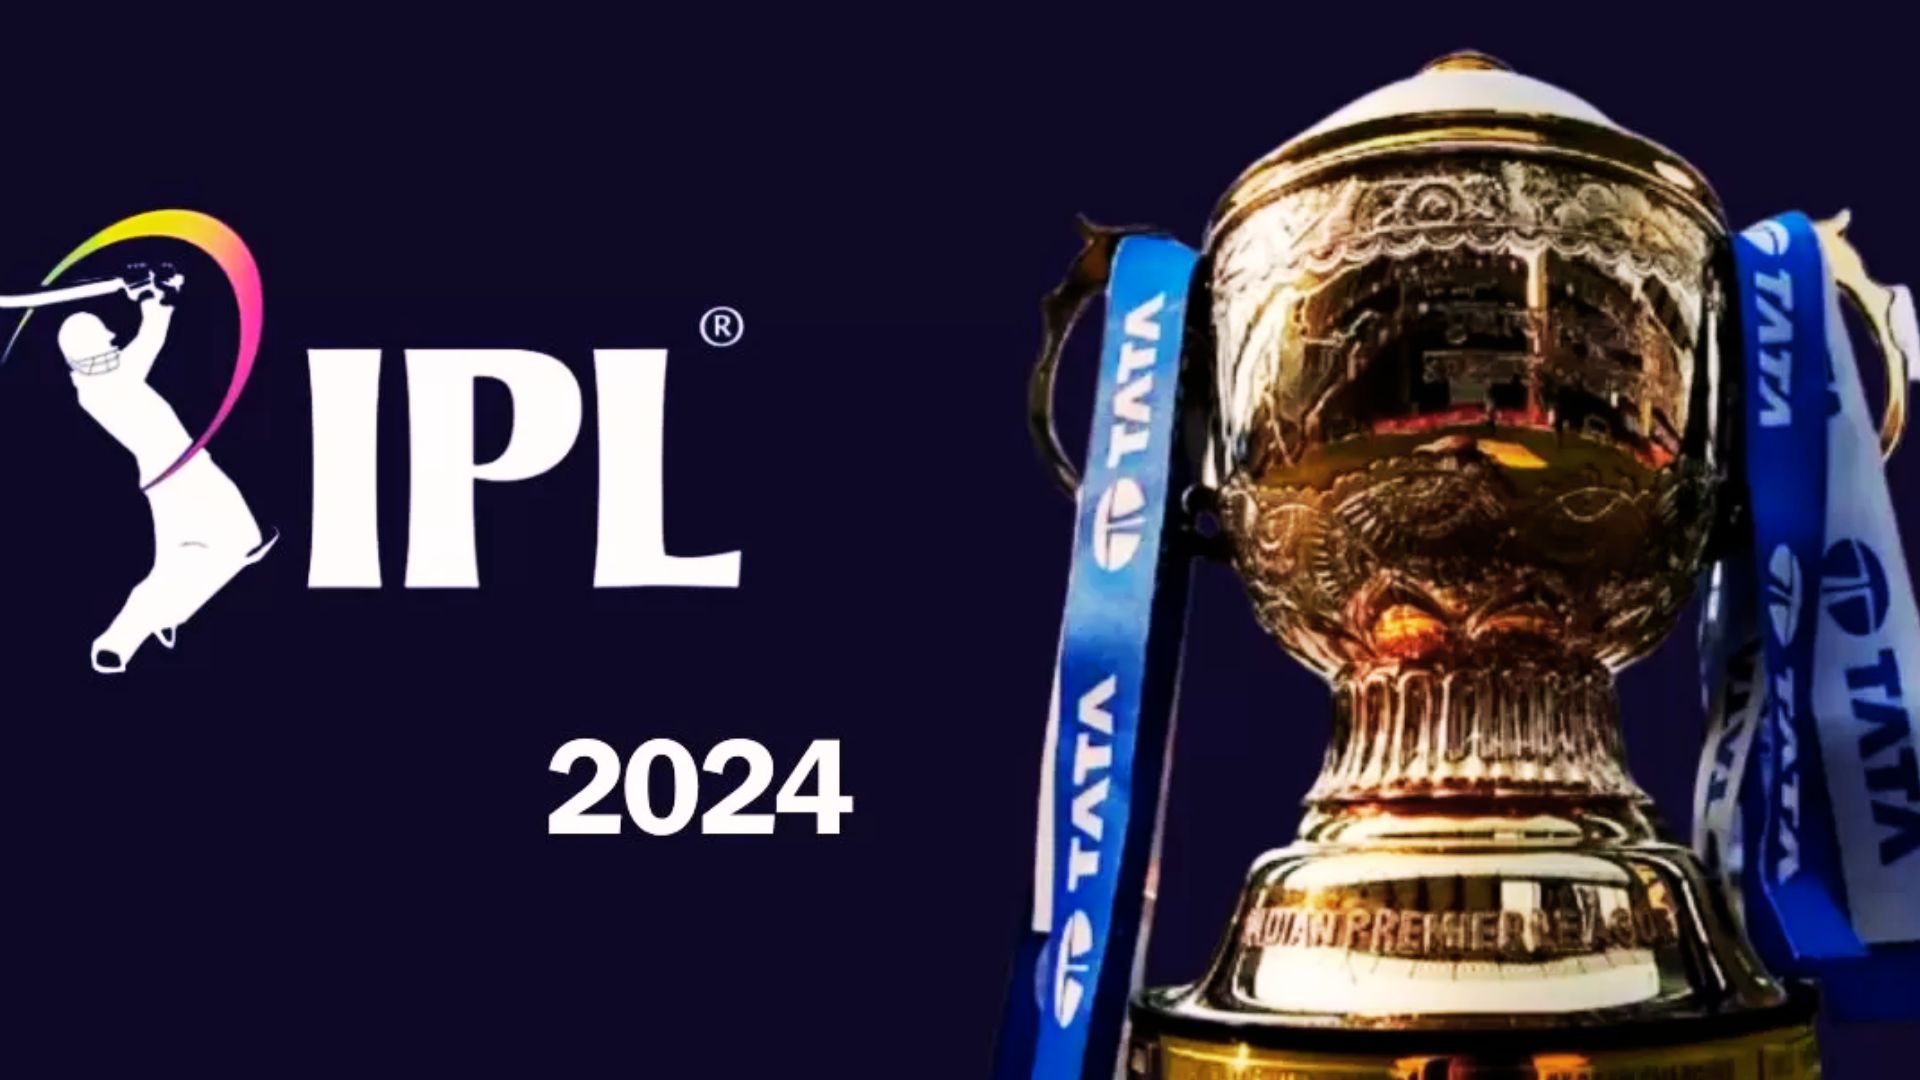 How to Book IPL Tickets Online in 2024?